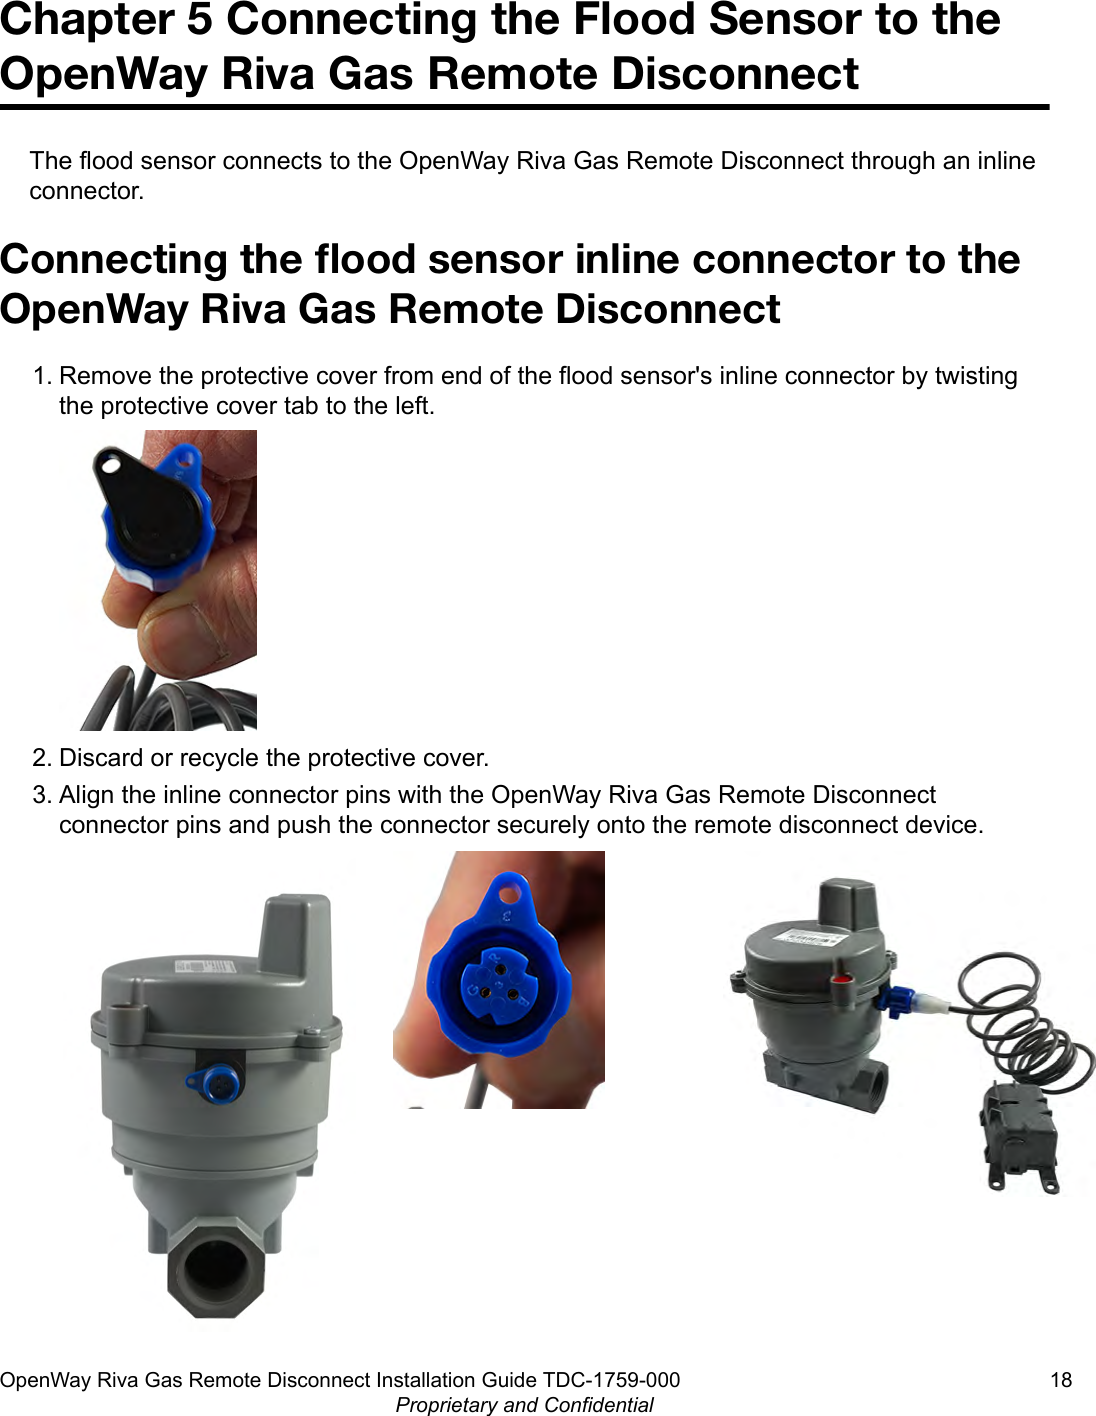 Chapter 5 Connecting the Flood Sensor to theOpenWay Riva Gas Remote DisconnectThe flood sensor connects to the OpenWay Riva Gas Remote Disconnect through an inlineconnector.Connecting the ﬂood sensor inline connector to theOpenWay Riva Gas Remote Disconnect1. Remove the protective cover from end of the flood sensor&apos;s inline connector by twistingthe protective cover tab to the left.2. Discard or recycle the protective cover.3. Align the inline connector pins with the OpenWay Riva Gas Remote Disconnectconnector pins and push the connector securely onto the remote disconnect device.OpenWay Riva Gas Remote Disconnect Installation Guide TDC-1759-000 18Proprietary and Confidential